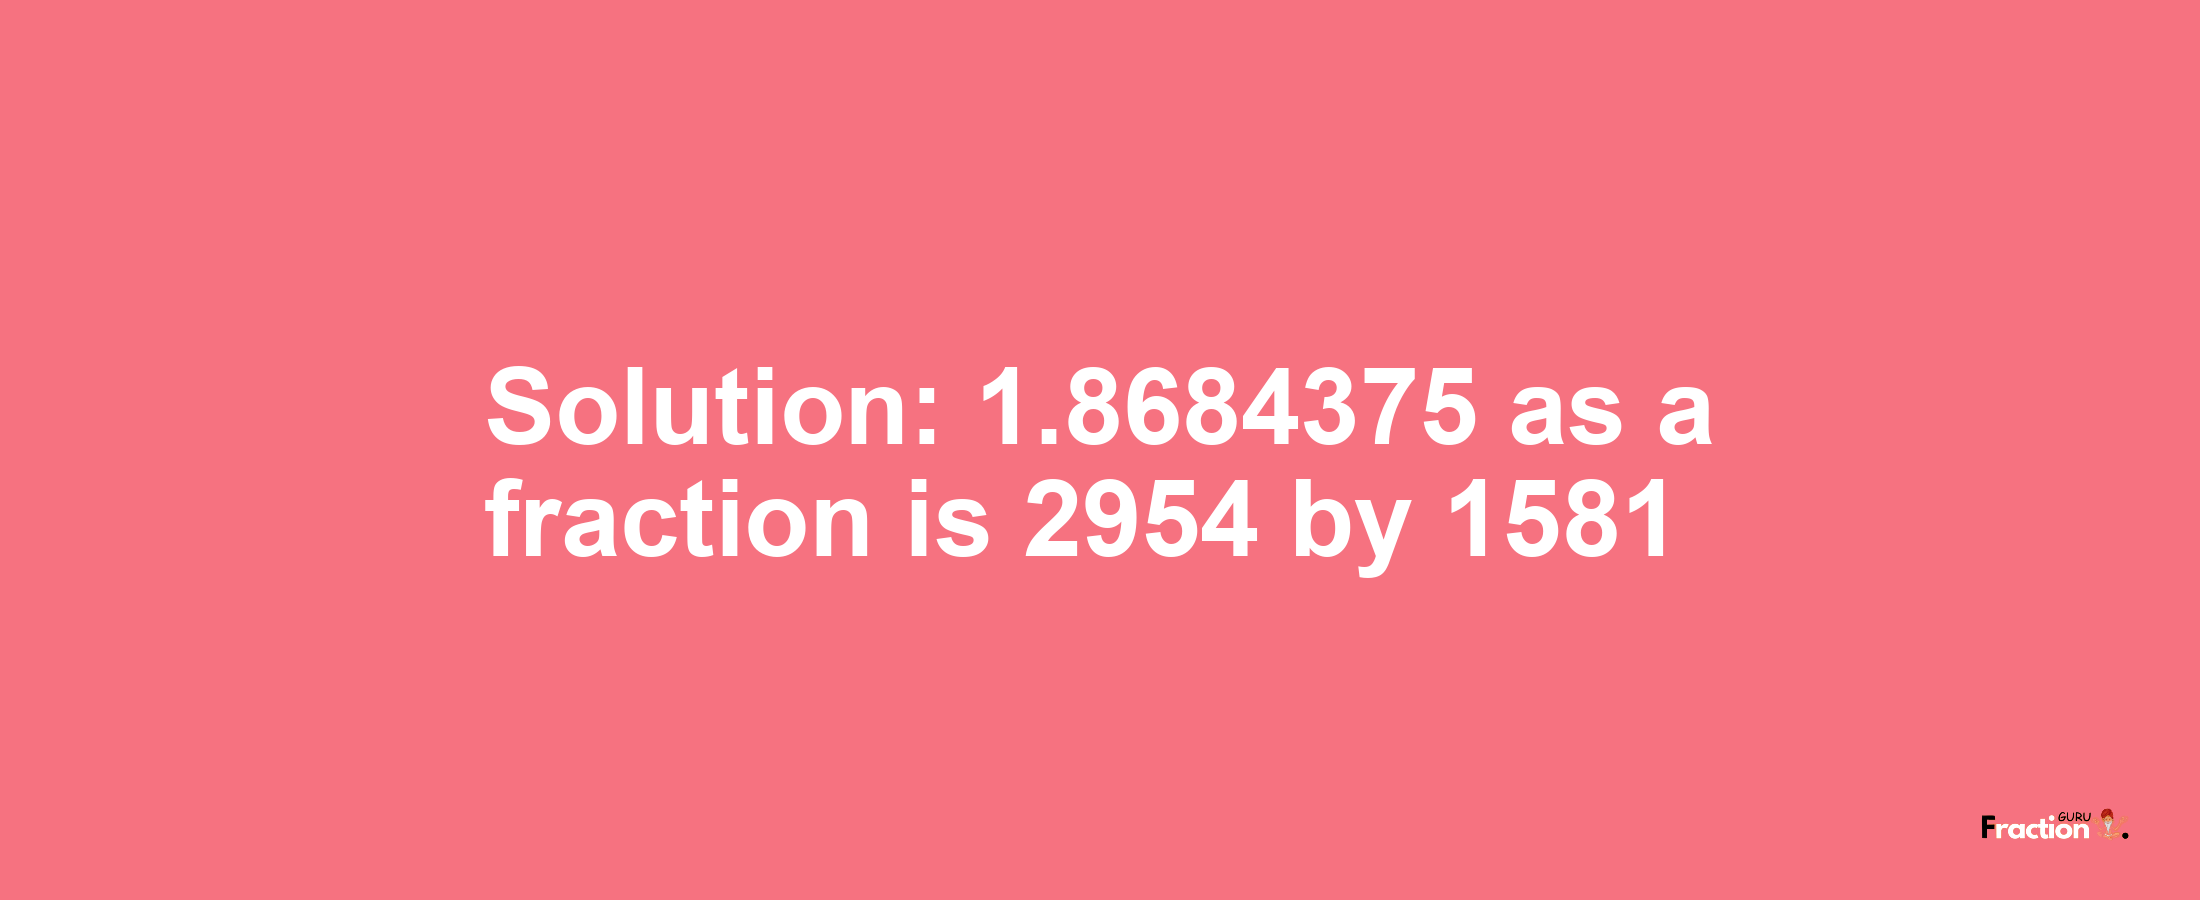 Solution:1.8684375 as a fraction is 2954/1581